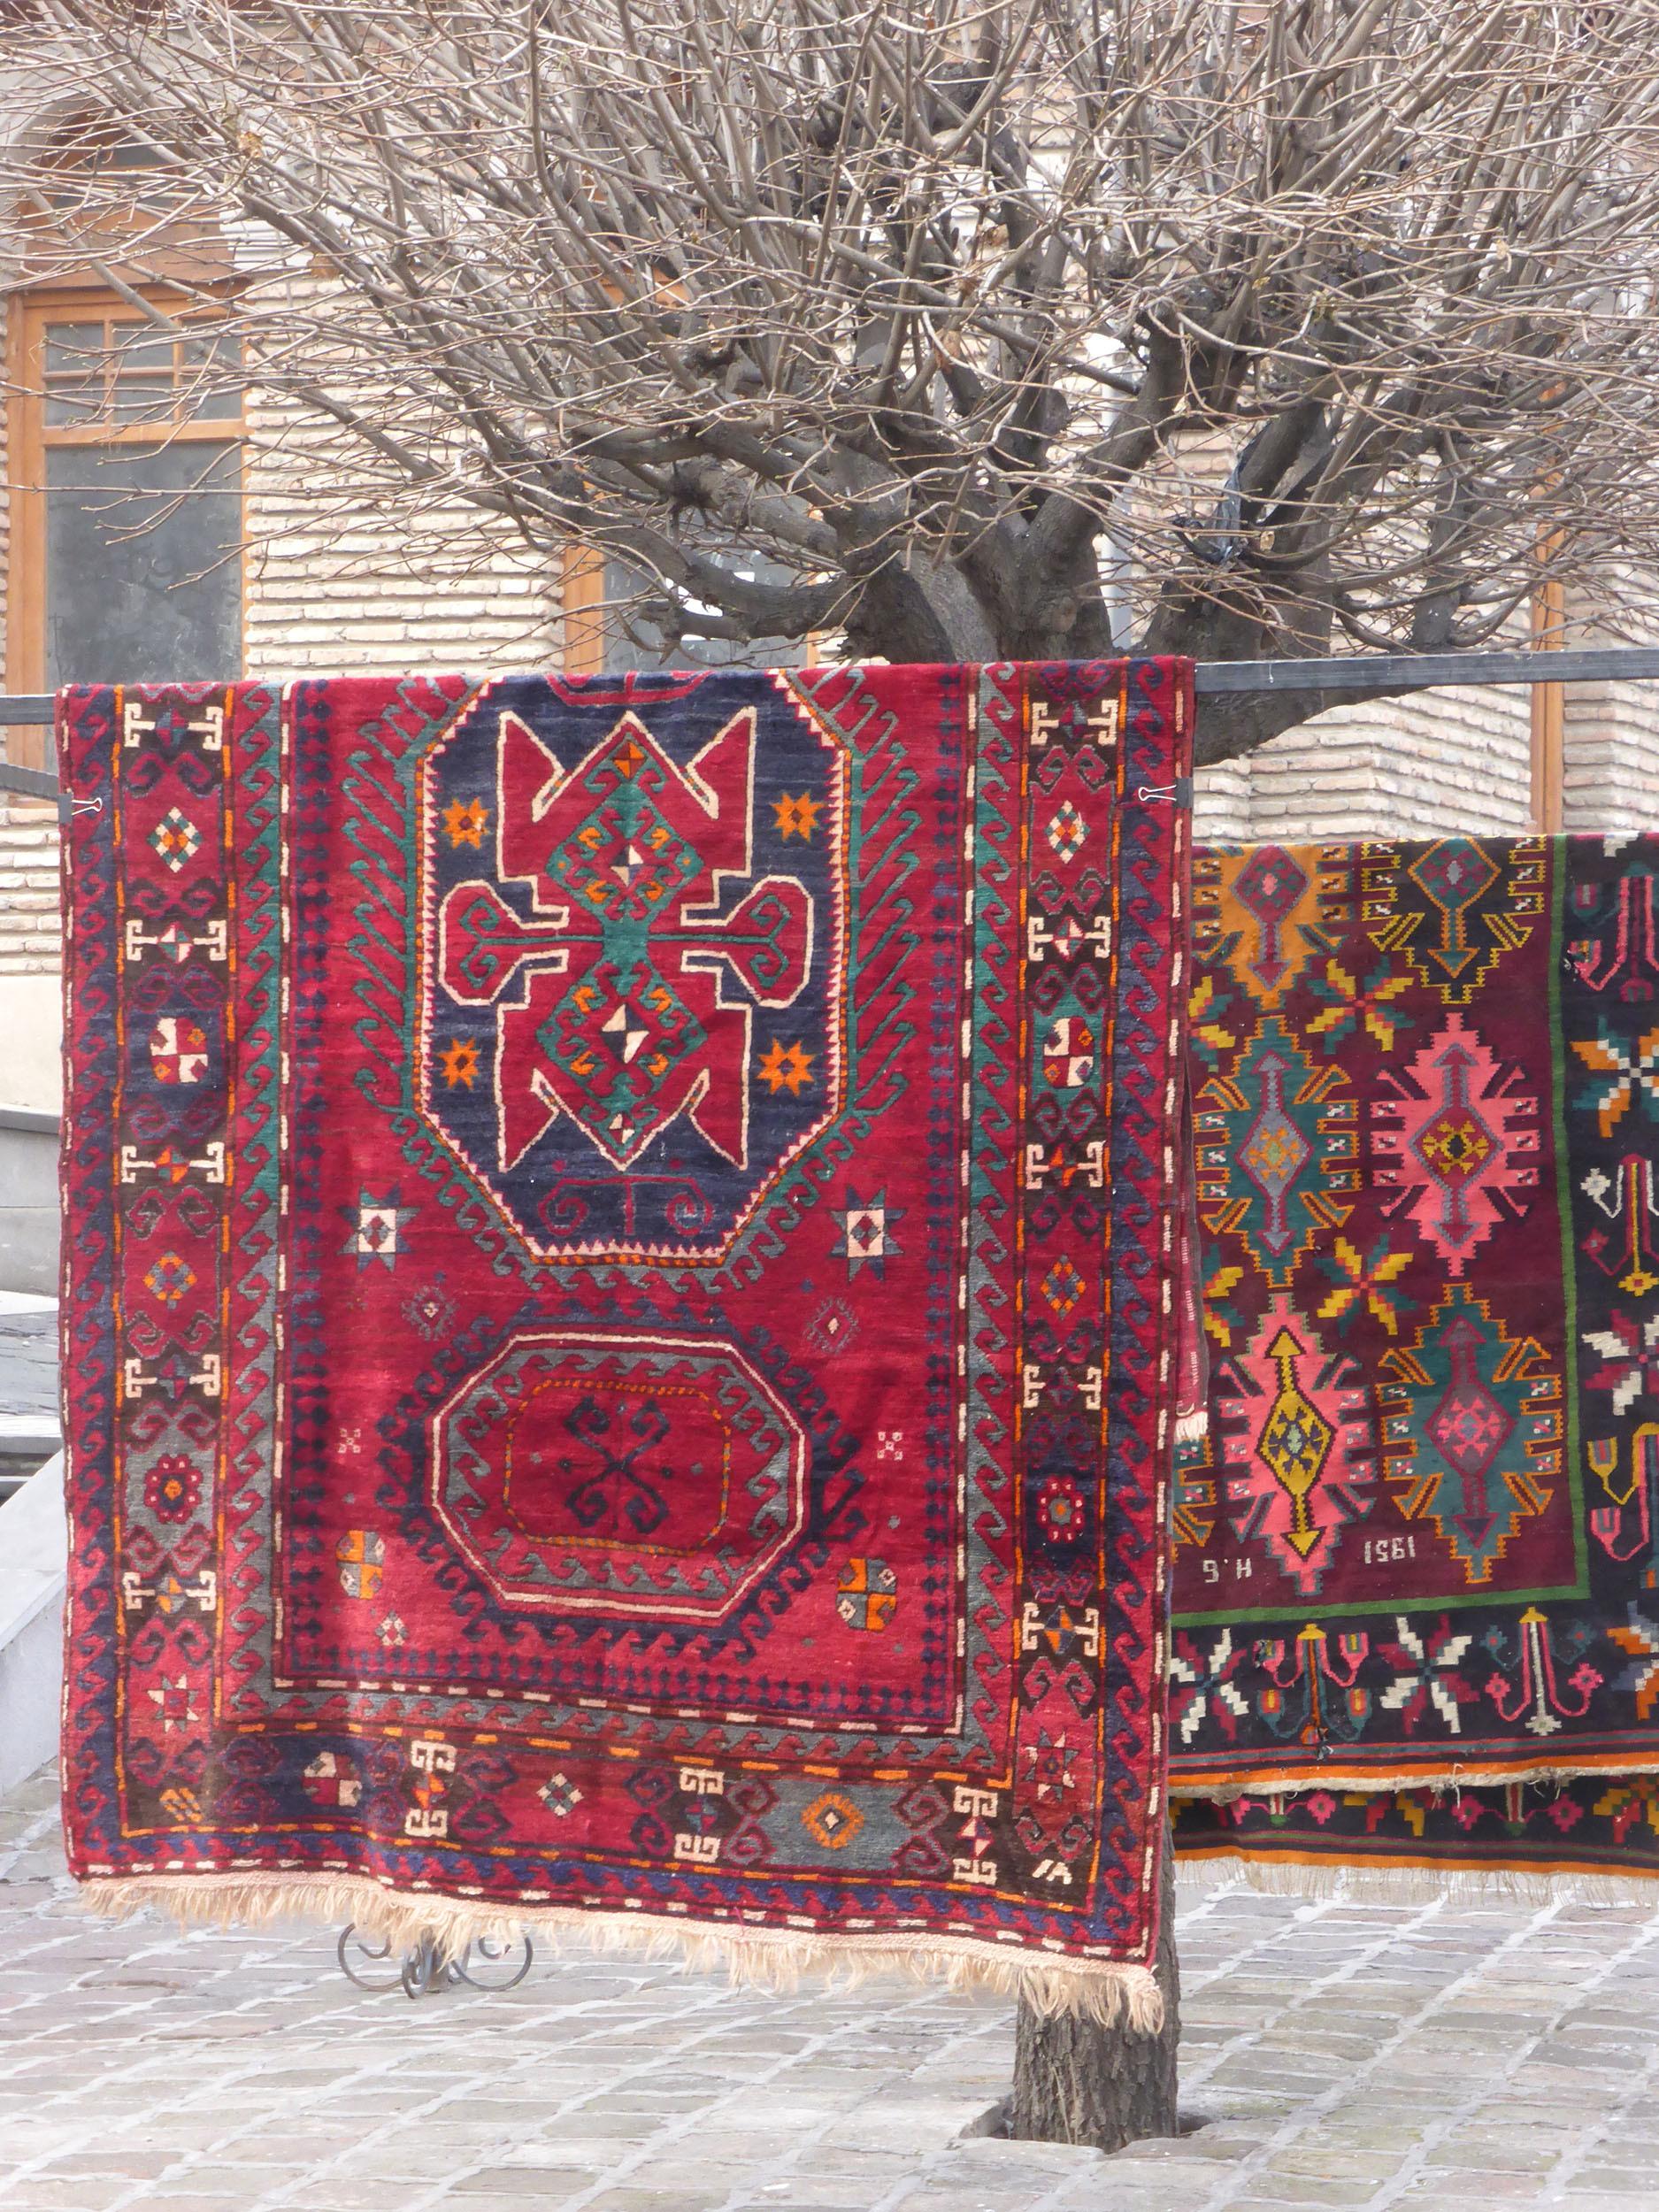 Rugs hanging in a street of Old Town Tbilisi Georgia